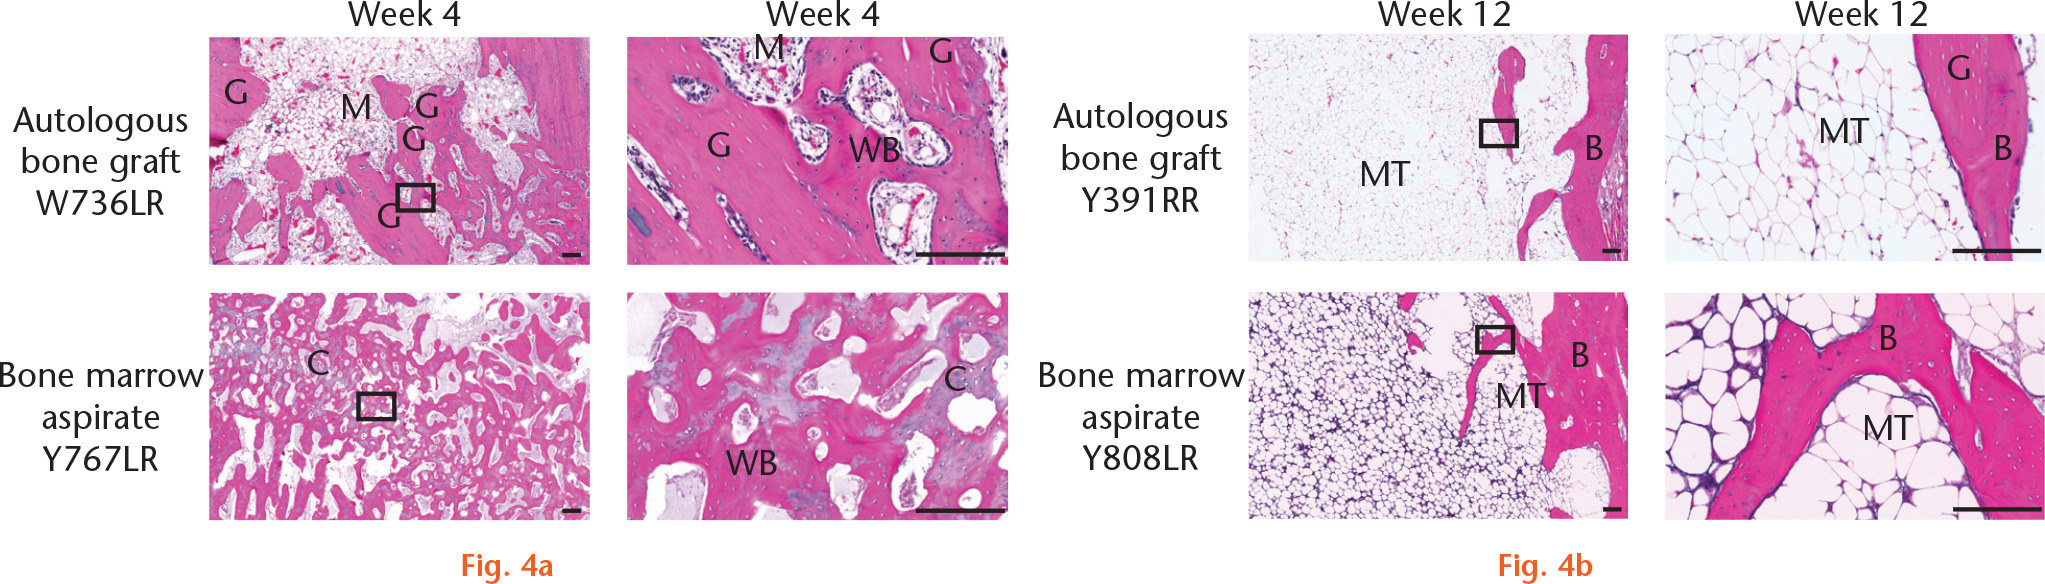 Fig. 4 
            Bone healing assessments by histology. Representative images of haematoxylin and eosin (H&E)-stained sections taken from samples approximating the mean bone volume scores from the µ-CT analyses. Images show general morphology of healing bone defects at a) post-surgical week 4 and b) week 12. Images in the right-hand column are high-power magnifications of the boxed areas in the low magnification images on the left. Scale bar represents 200 µm. G, autologous graft; M, marrow; WB, woven bone; C, chondrocytes; B, bone; MT, marrow-like tissue.
          